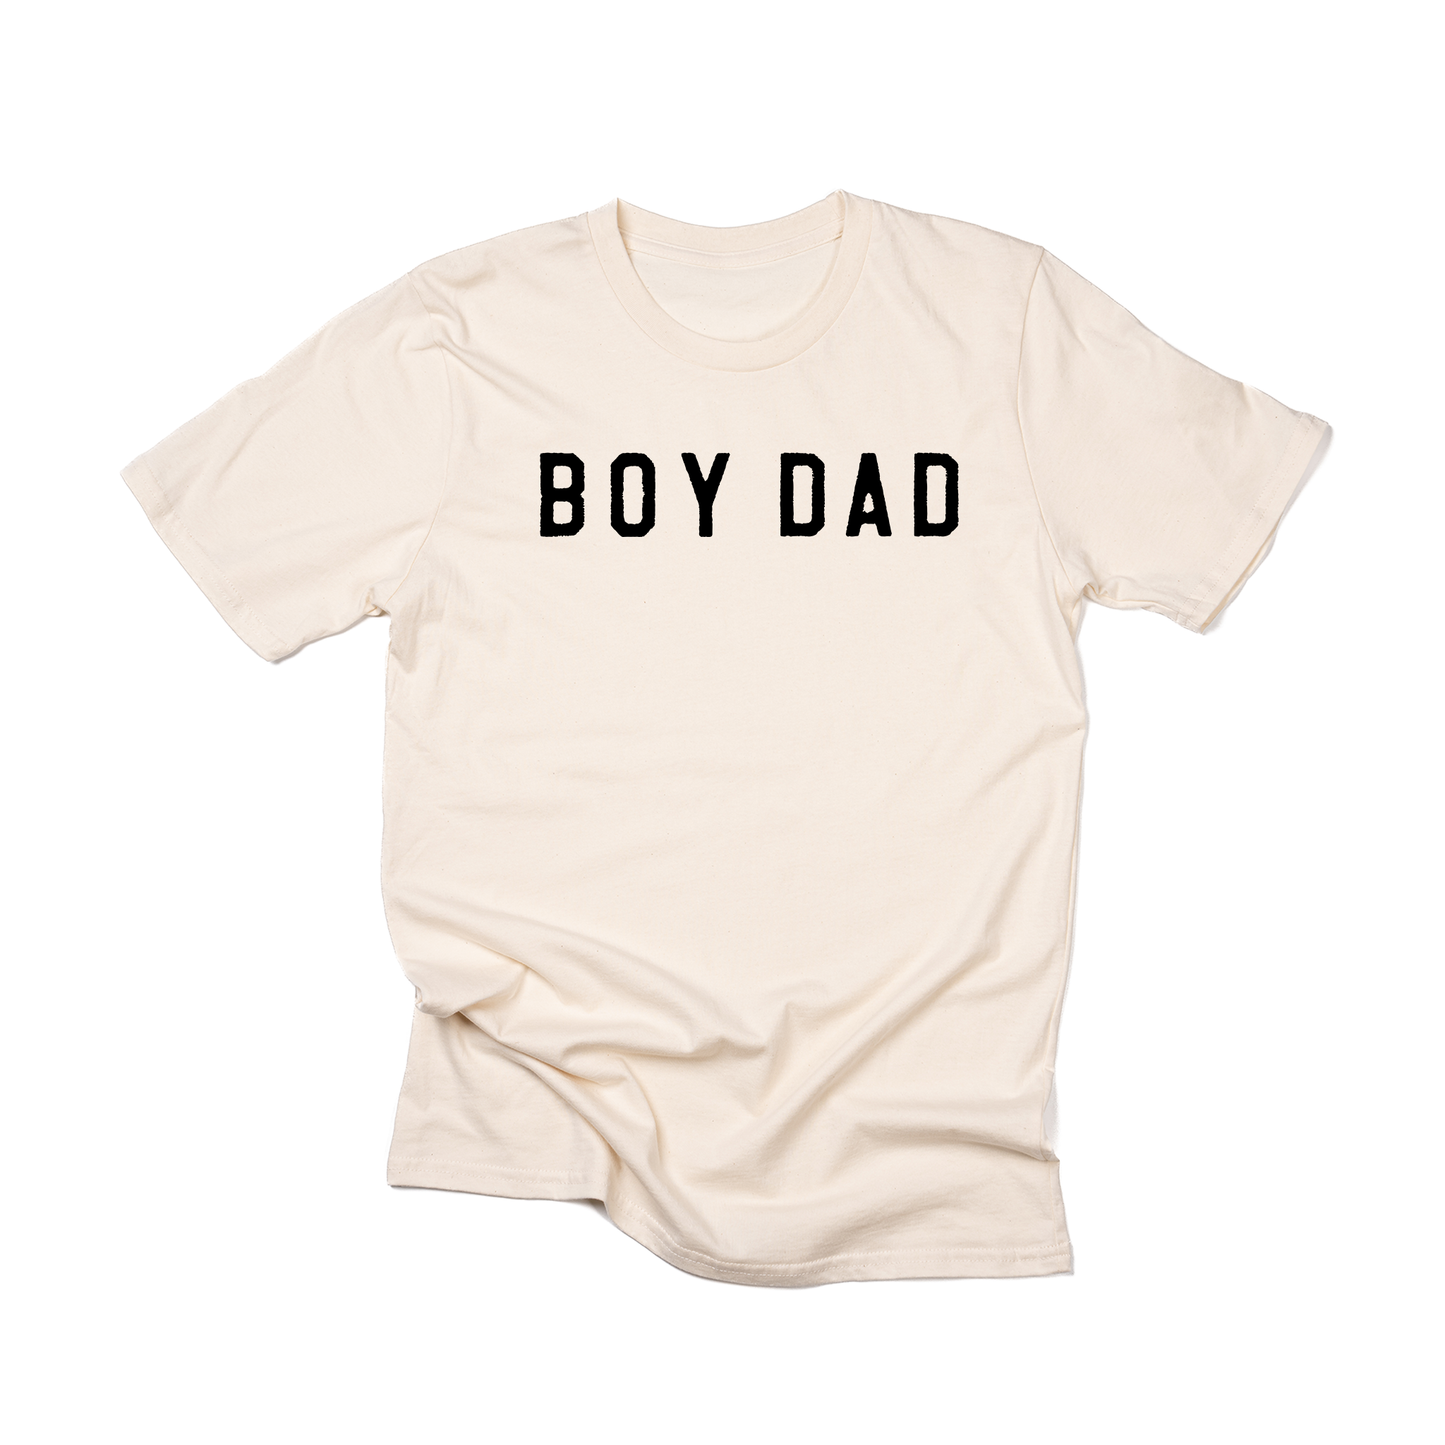 Boy Dad® (Across Front, Black) - Tee (Natural)